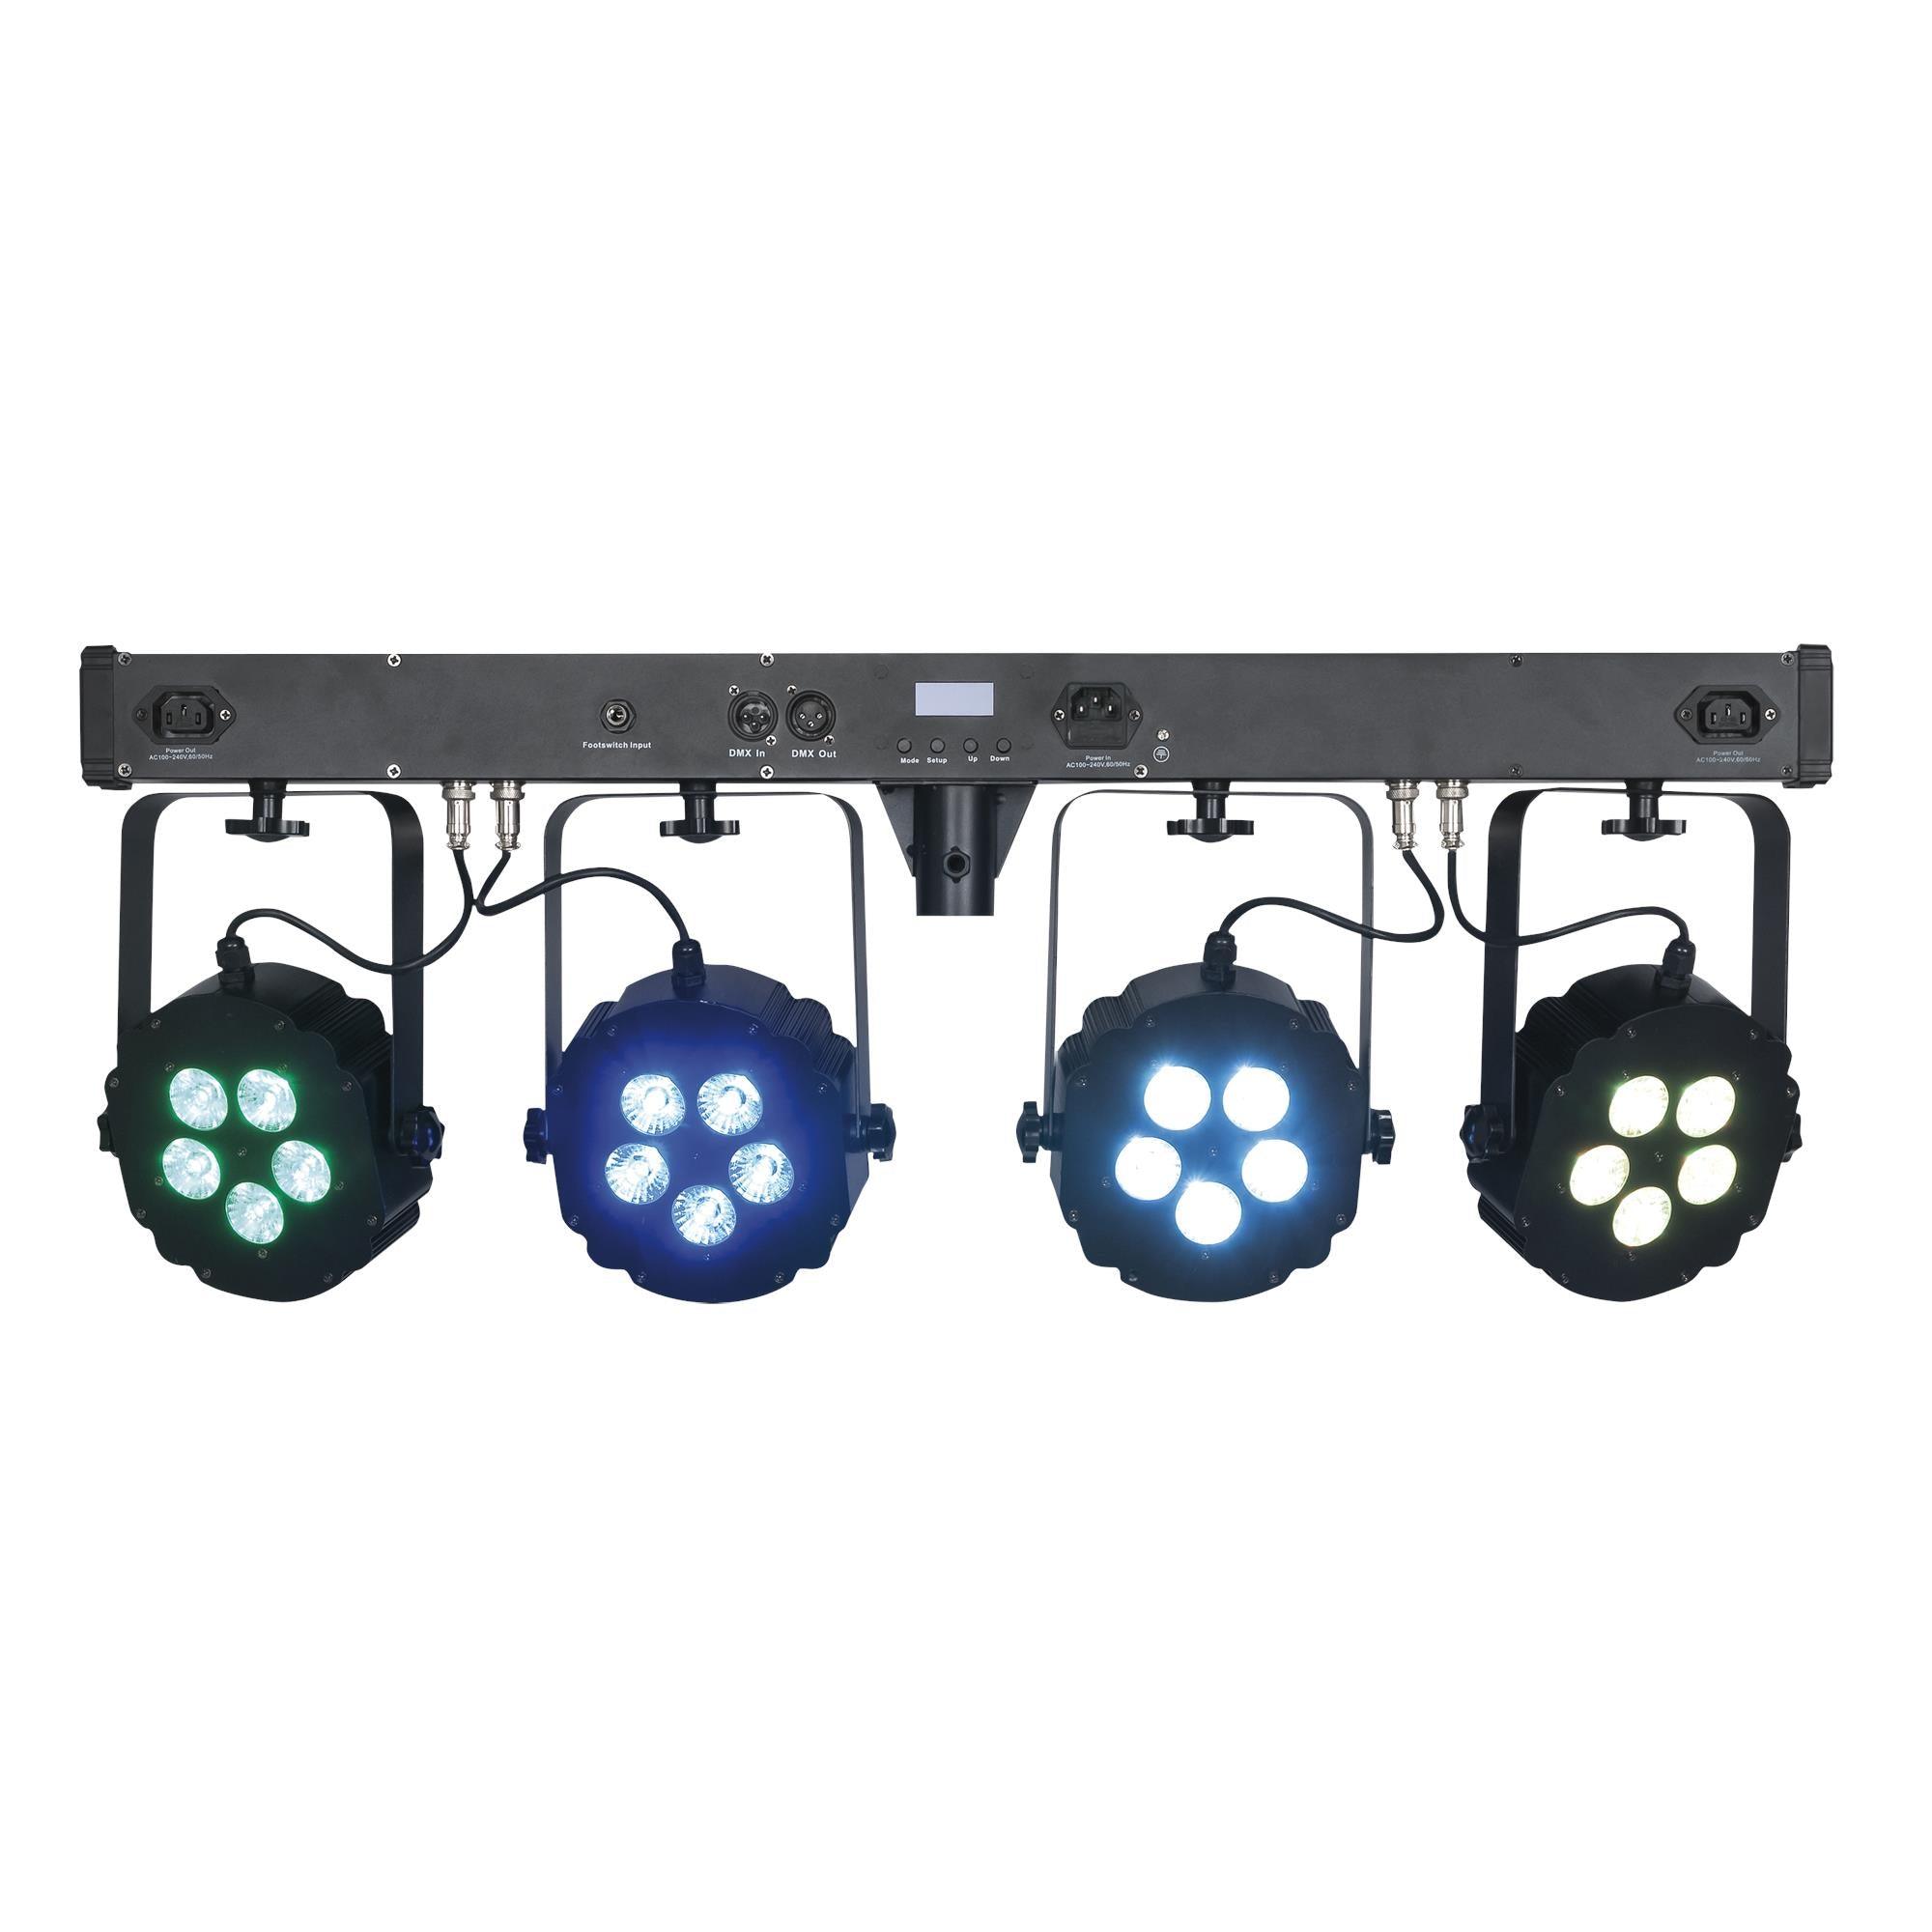 Showtec Compact Power Light Set 4 RGBW With Bag and Stand - DY Pro Audio